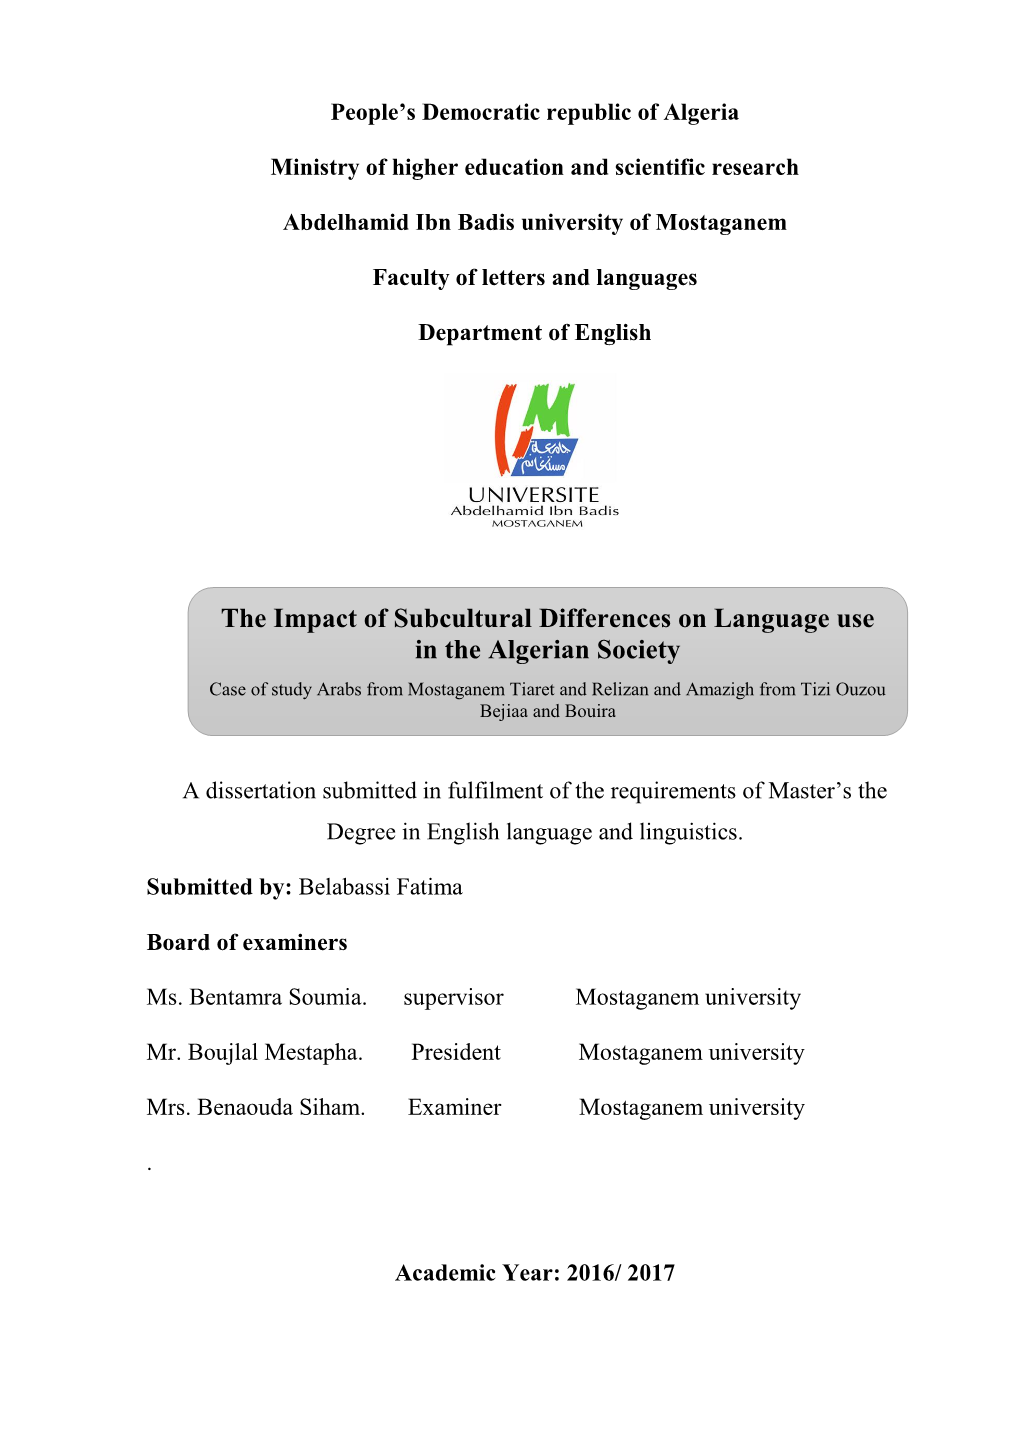 The Impact of Subcultural Differences on Language Use in the Algerian